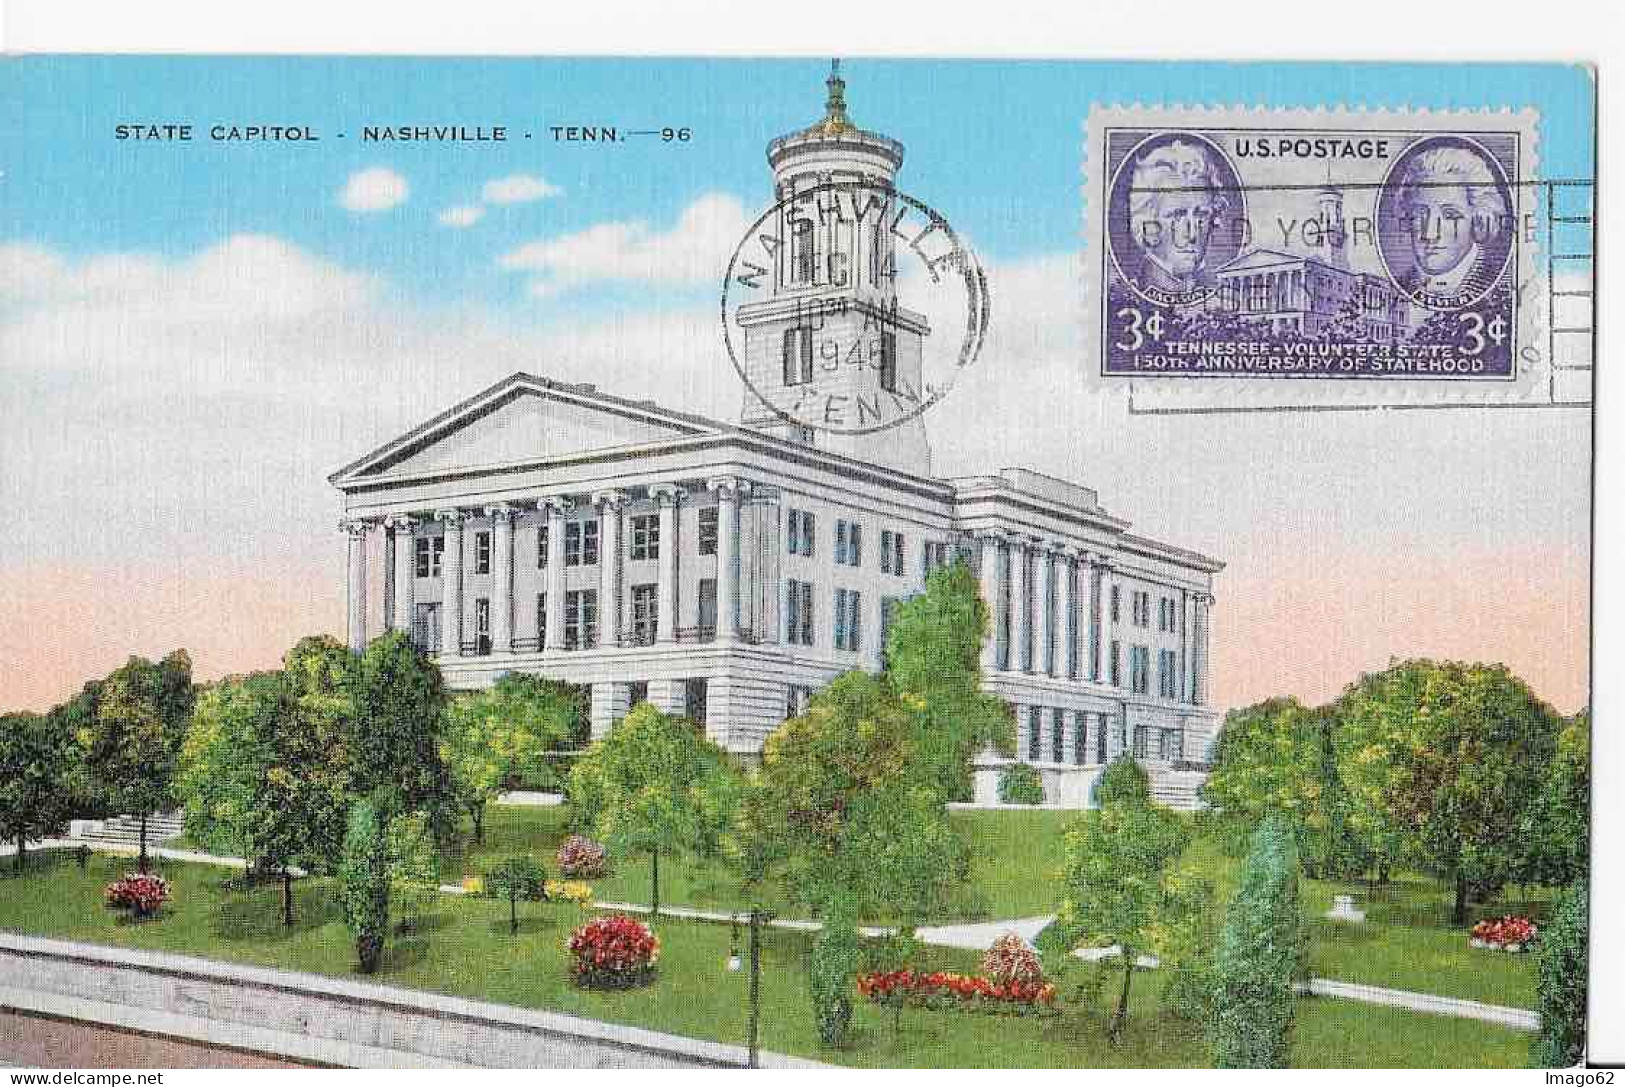 USA FDC Tennessee - Volunteer State 150th. Anniversary Of Statehood 1946 - Maximum Cards